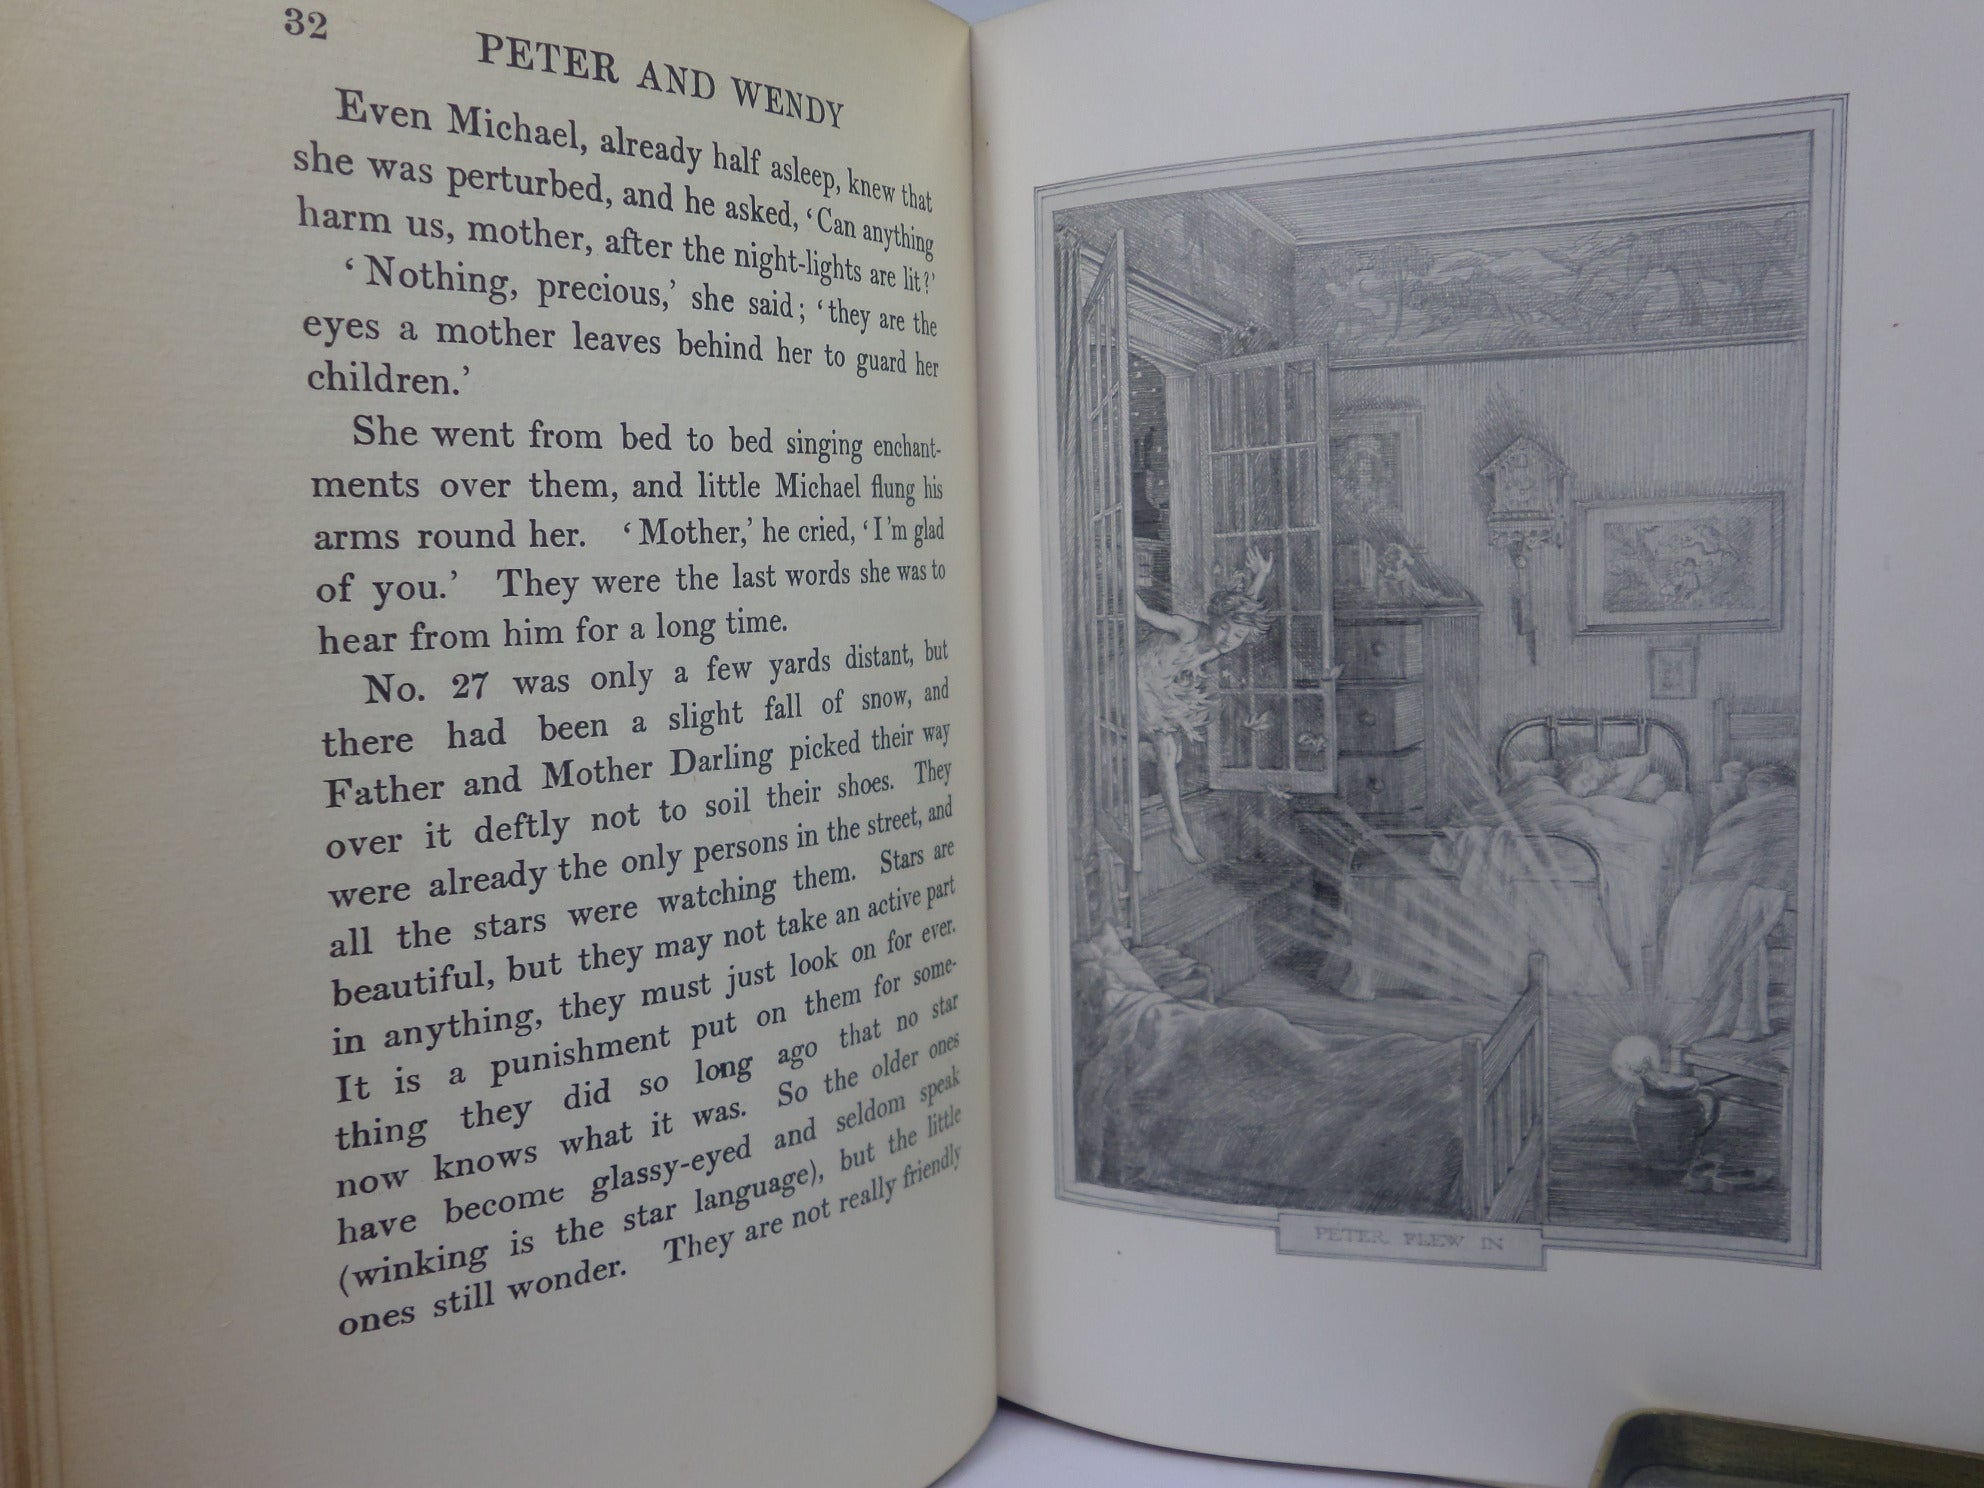 PETER AND WENDY BY J.M. BARRIE ILLUSTRATED BY F.D. BEDFORD 1911 FIRST EDITION